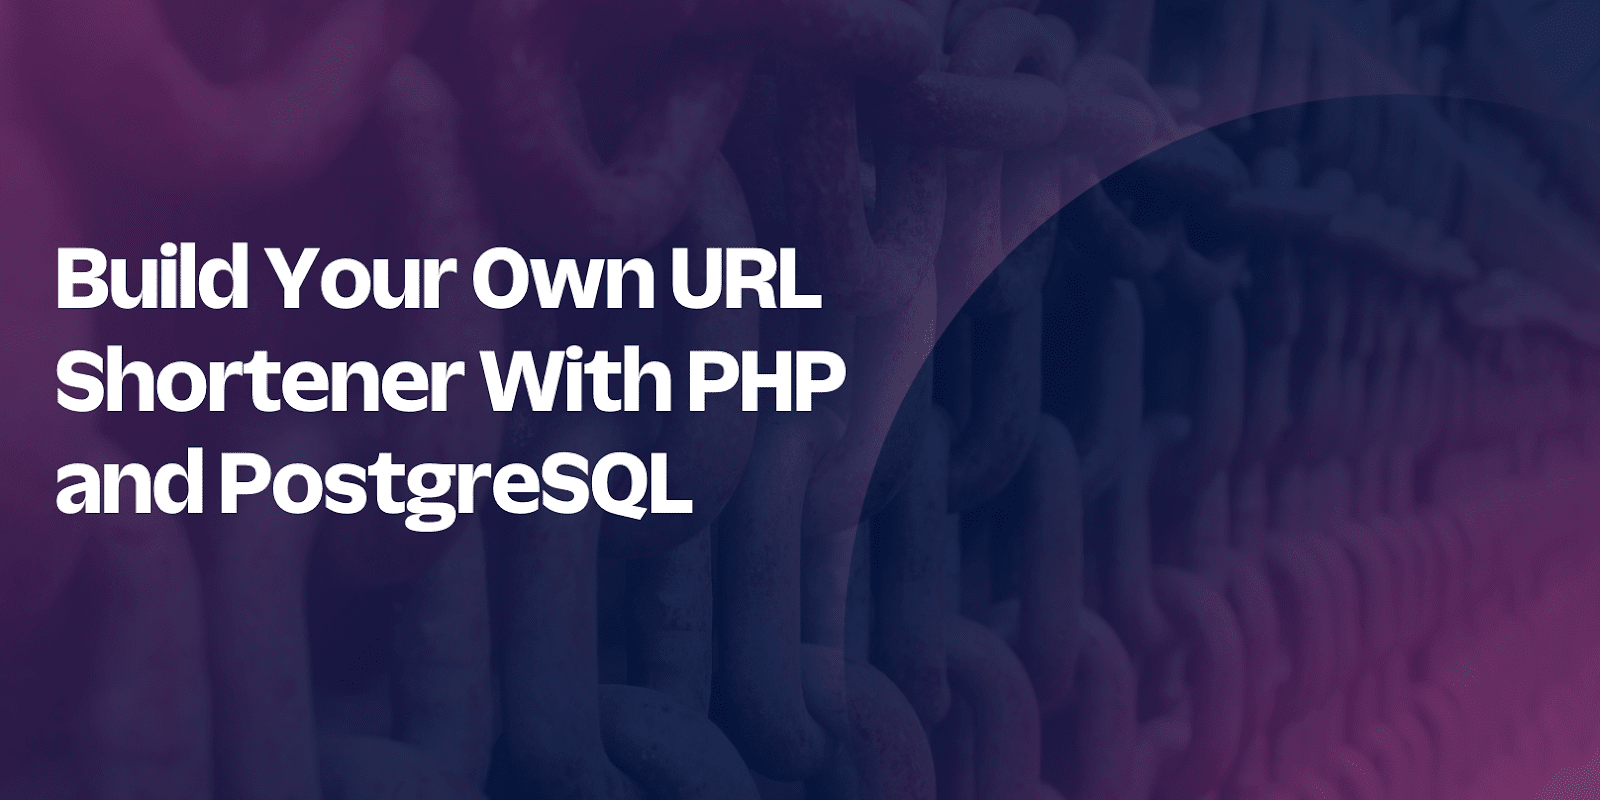 Build Your Own URL Shortener With PHP and PostgreSQL